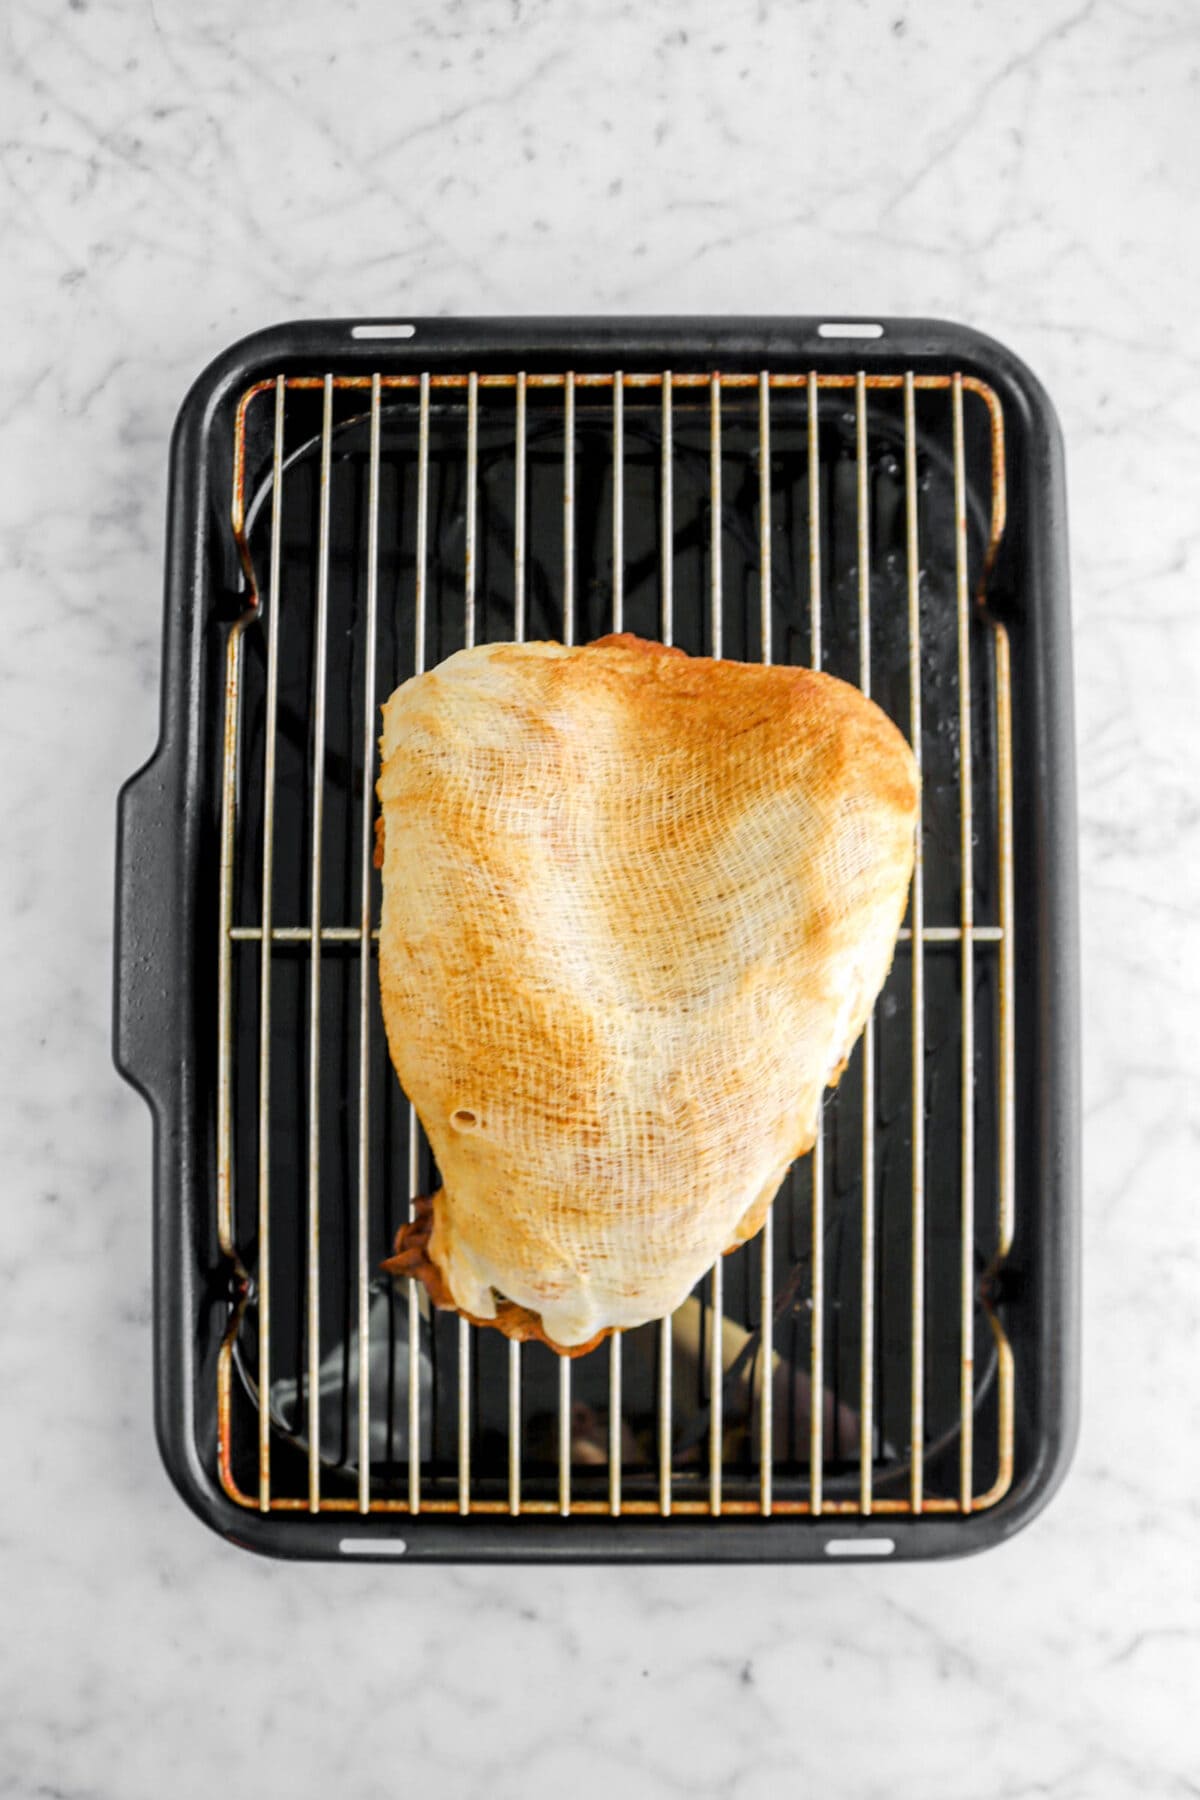 baked turkey breast wrapped in cheesecloth on roasting pan.